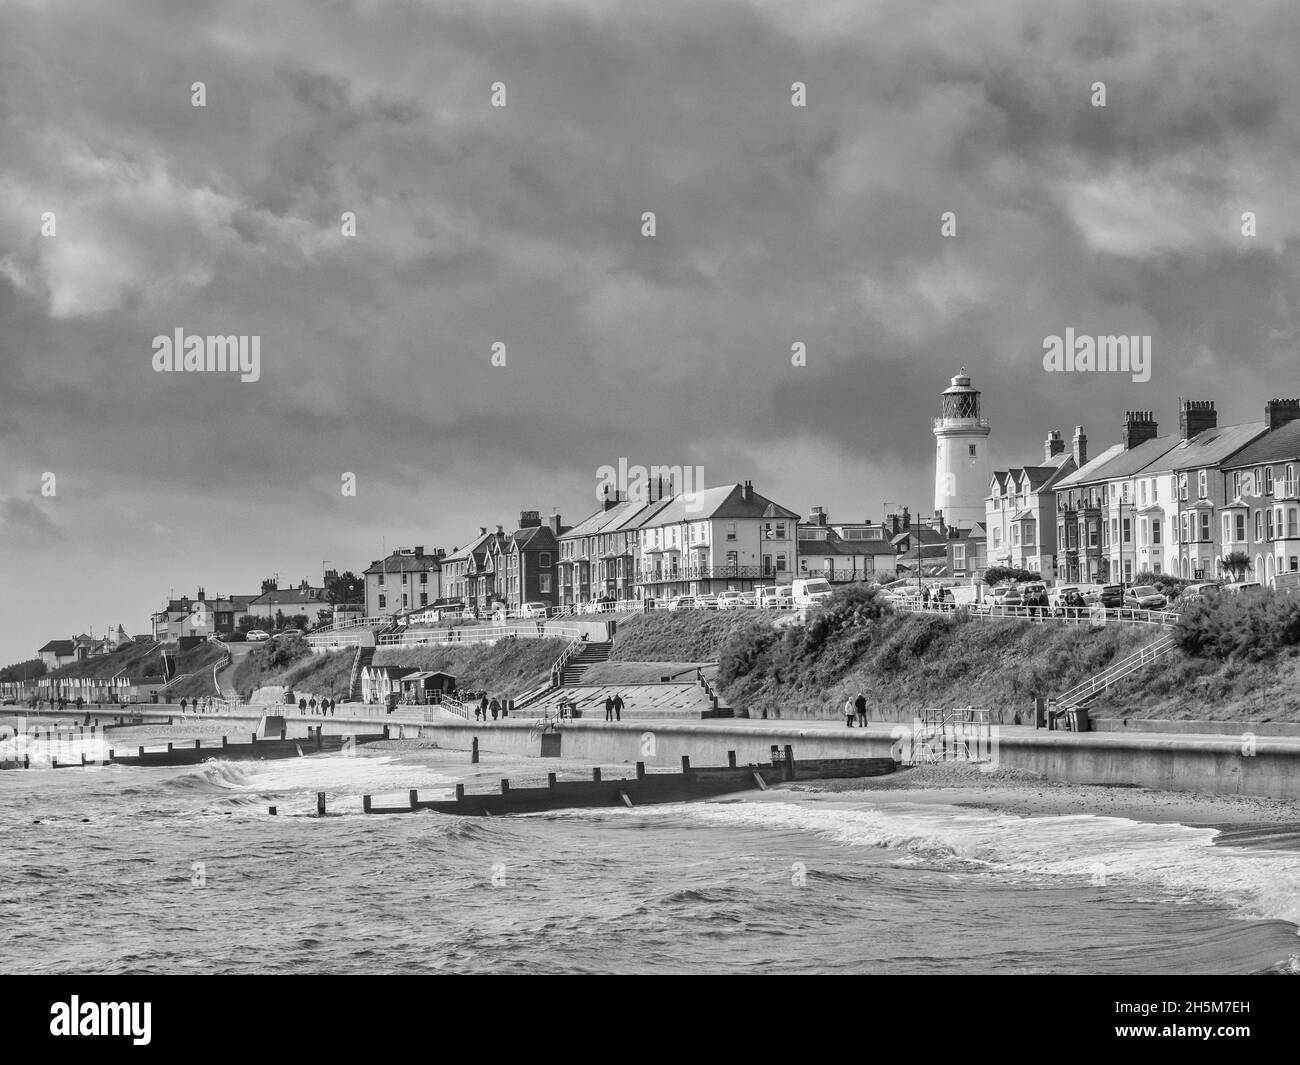 Pictorial image of the coastal resort town of Southwold in the county of Suffolk of East Anglia in Southwest England Stock Photo